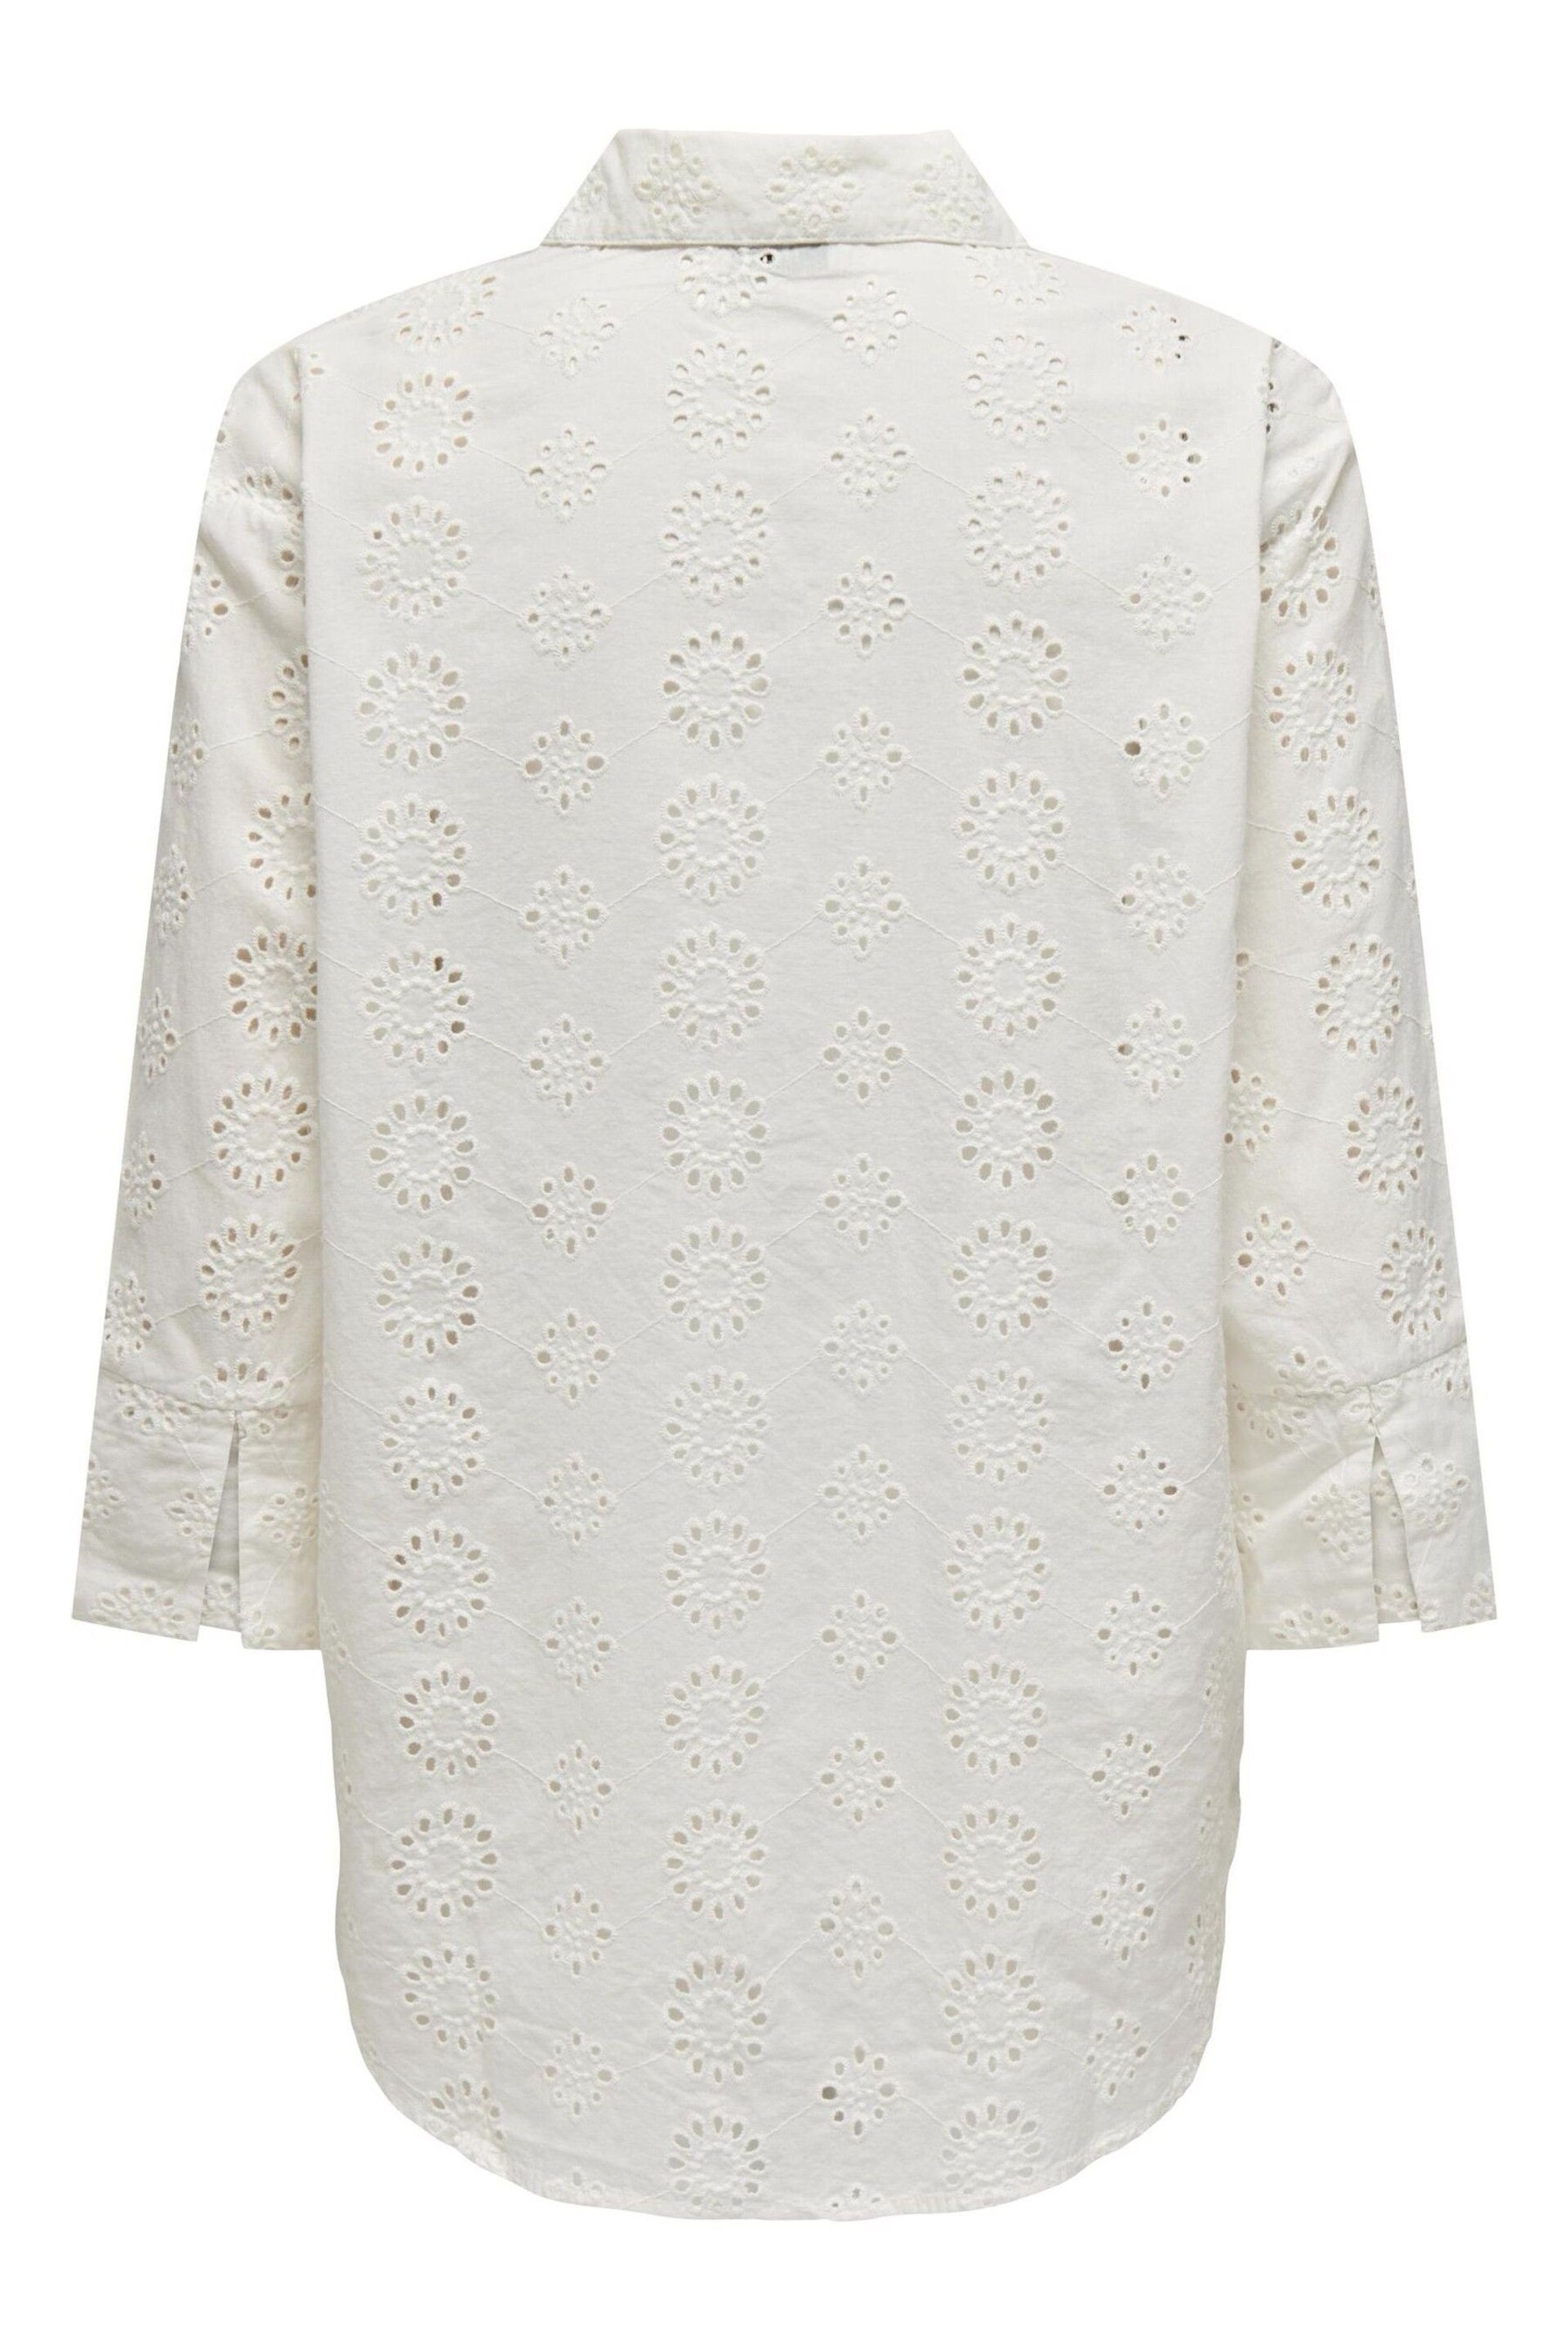 JDY White Broderie Relaxed Summer Shirt - Image 6 of 6